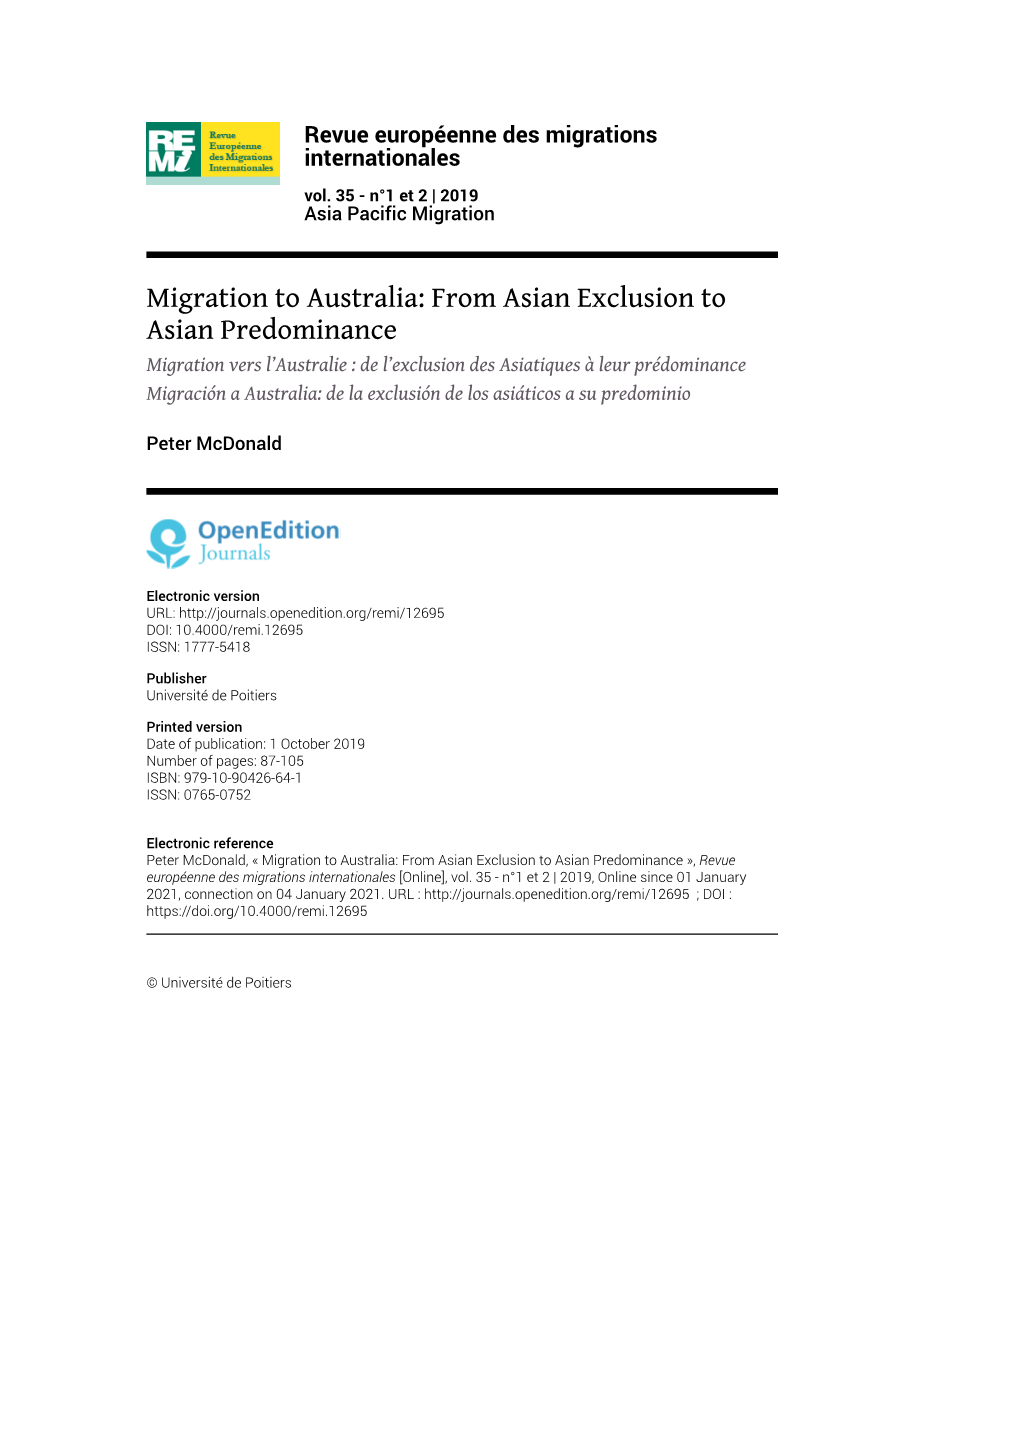 Migration to Australia: from Asian Exclusion to Asian Predominance